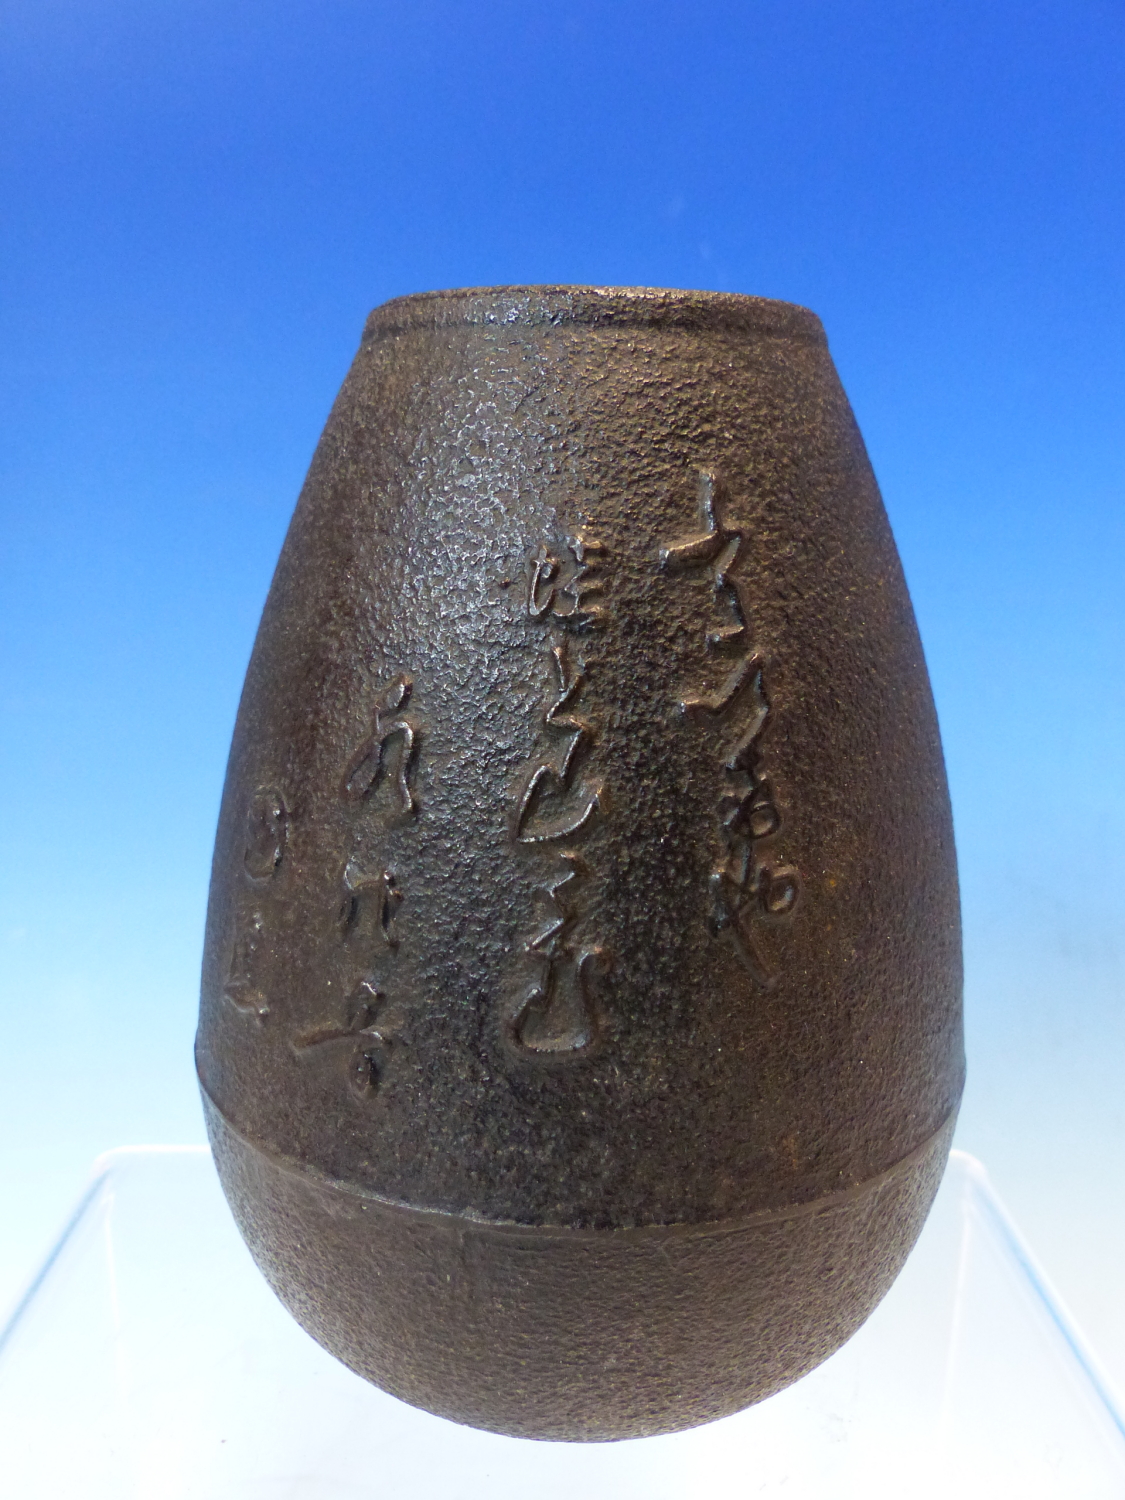 A JAPANESE CAST IRON VASE OF OVOID FORM WITH SCRIPT DECORATION AND SIGNITURE SEAL. 13CM HIGH